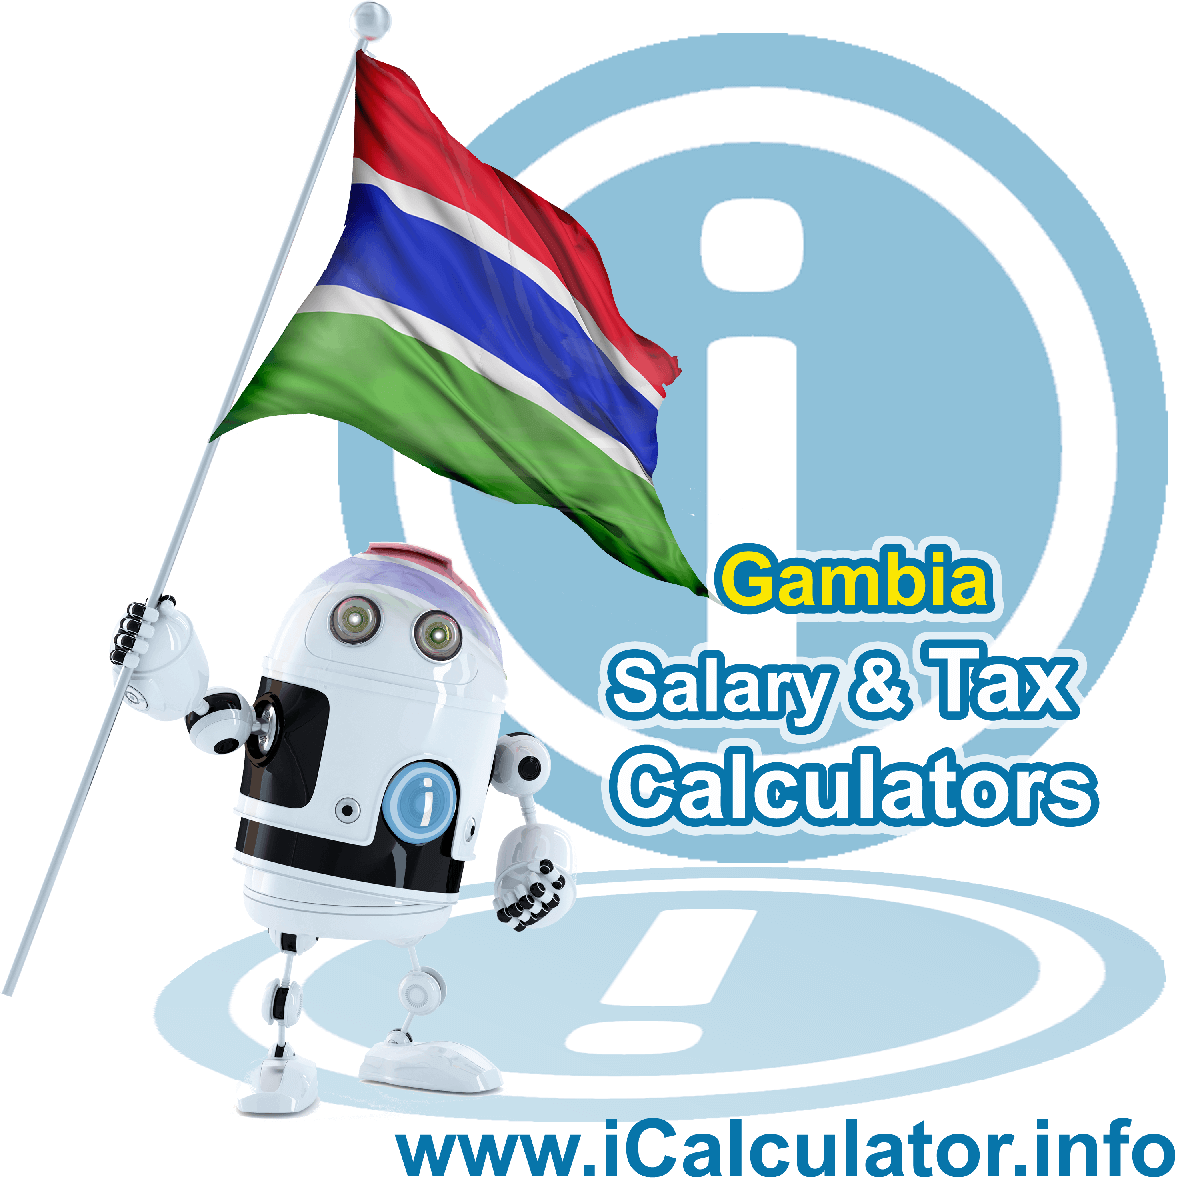 Gambia Wage Calculator. This image shows the Gambia flag and information relating to the tax formula for the Gambia Tax Calculator